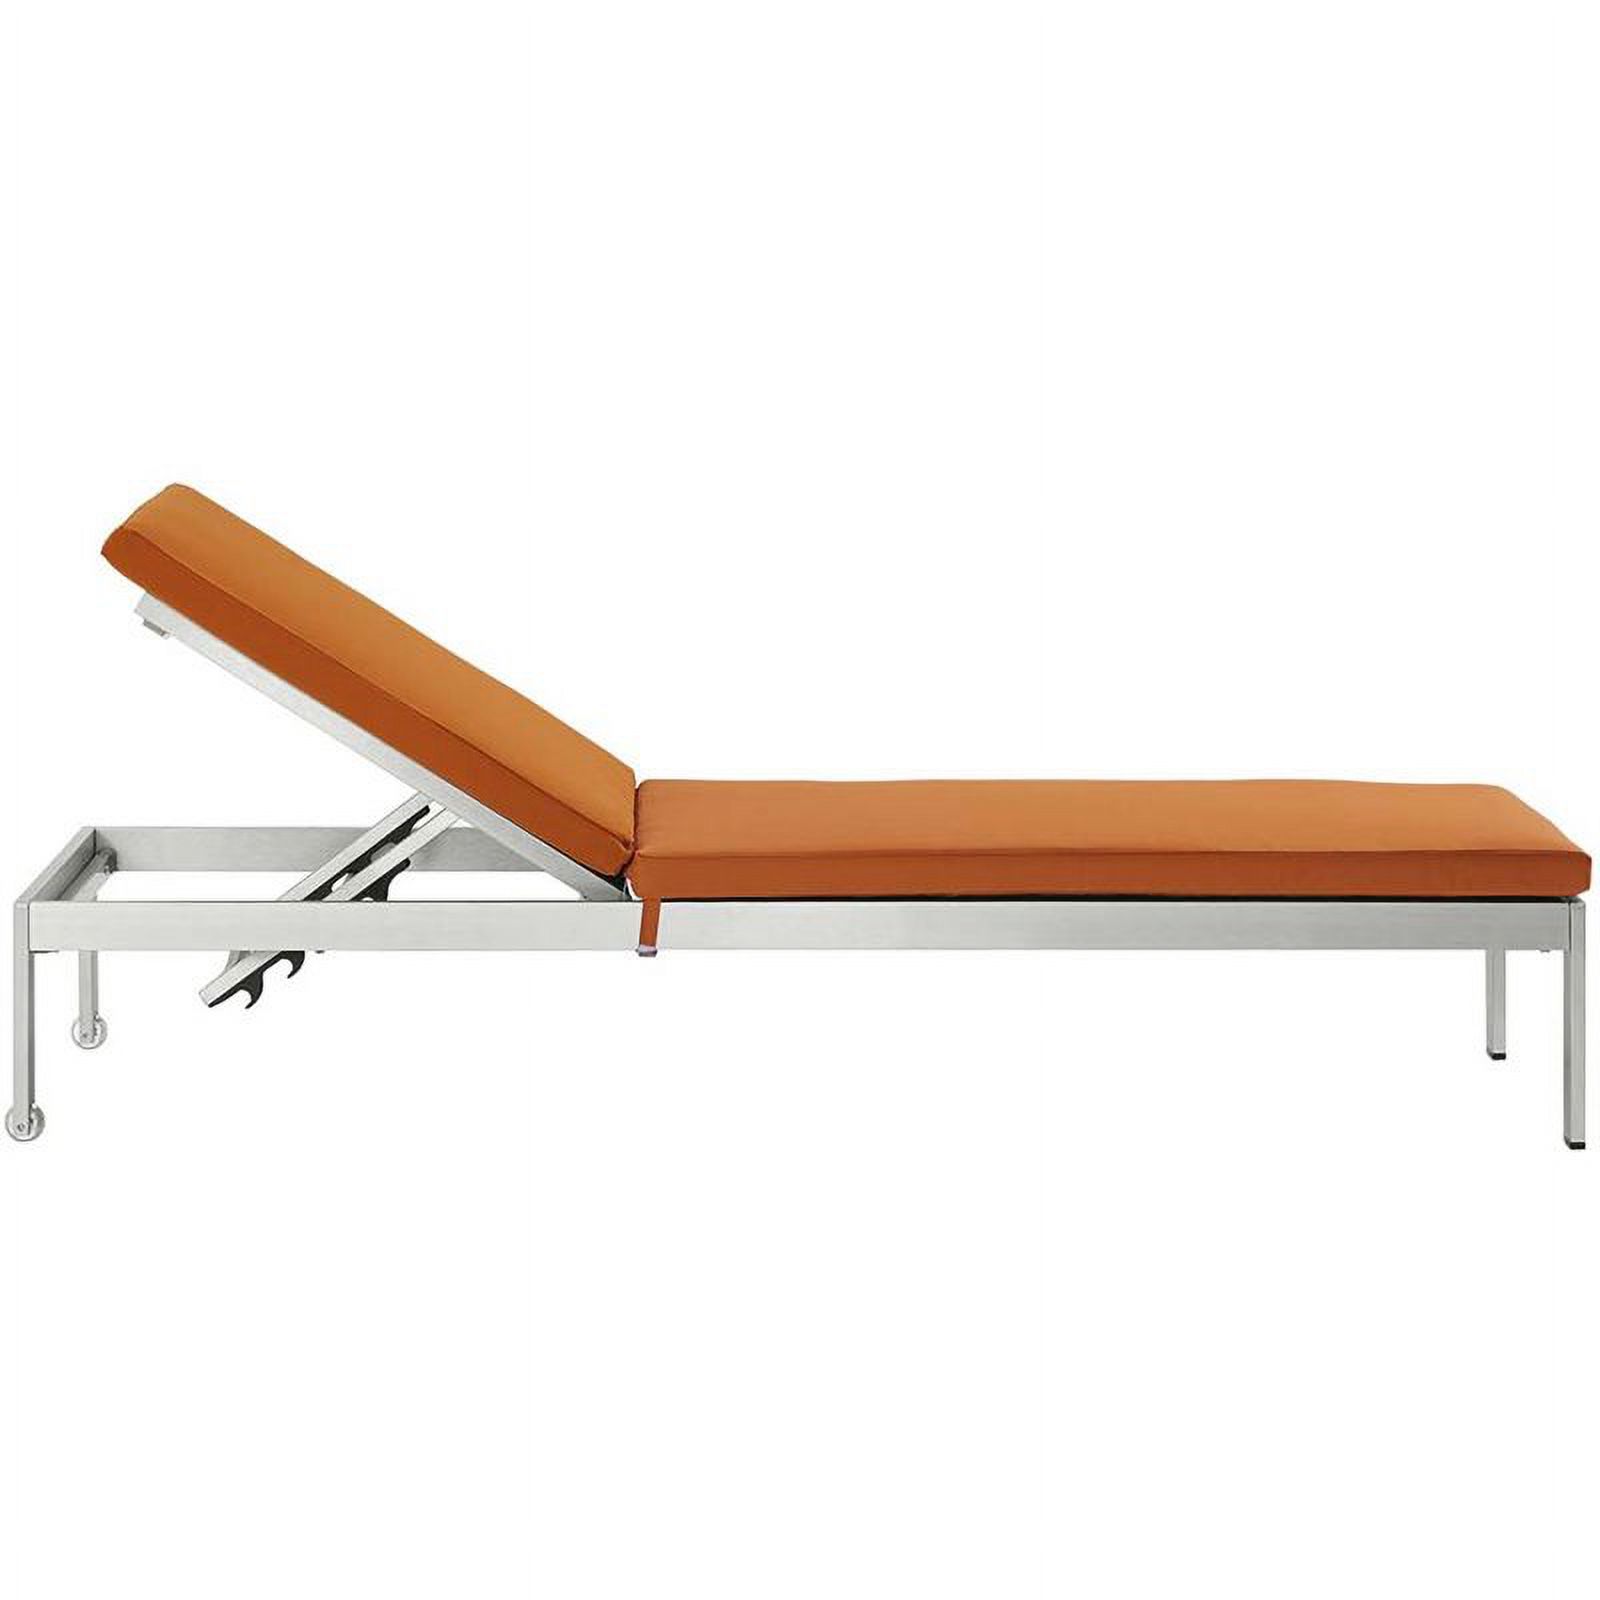 Pemberly Row Modern Fabric Patio Chaise Lounge in Orange (Set of 2) - image 5 of 6